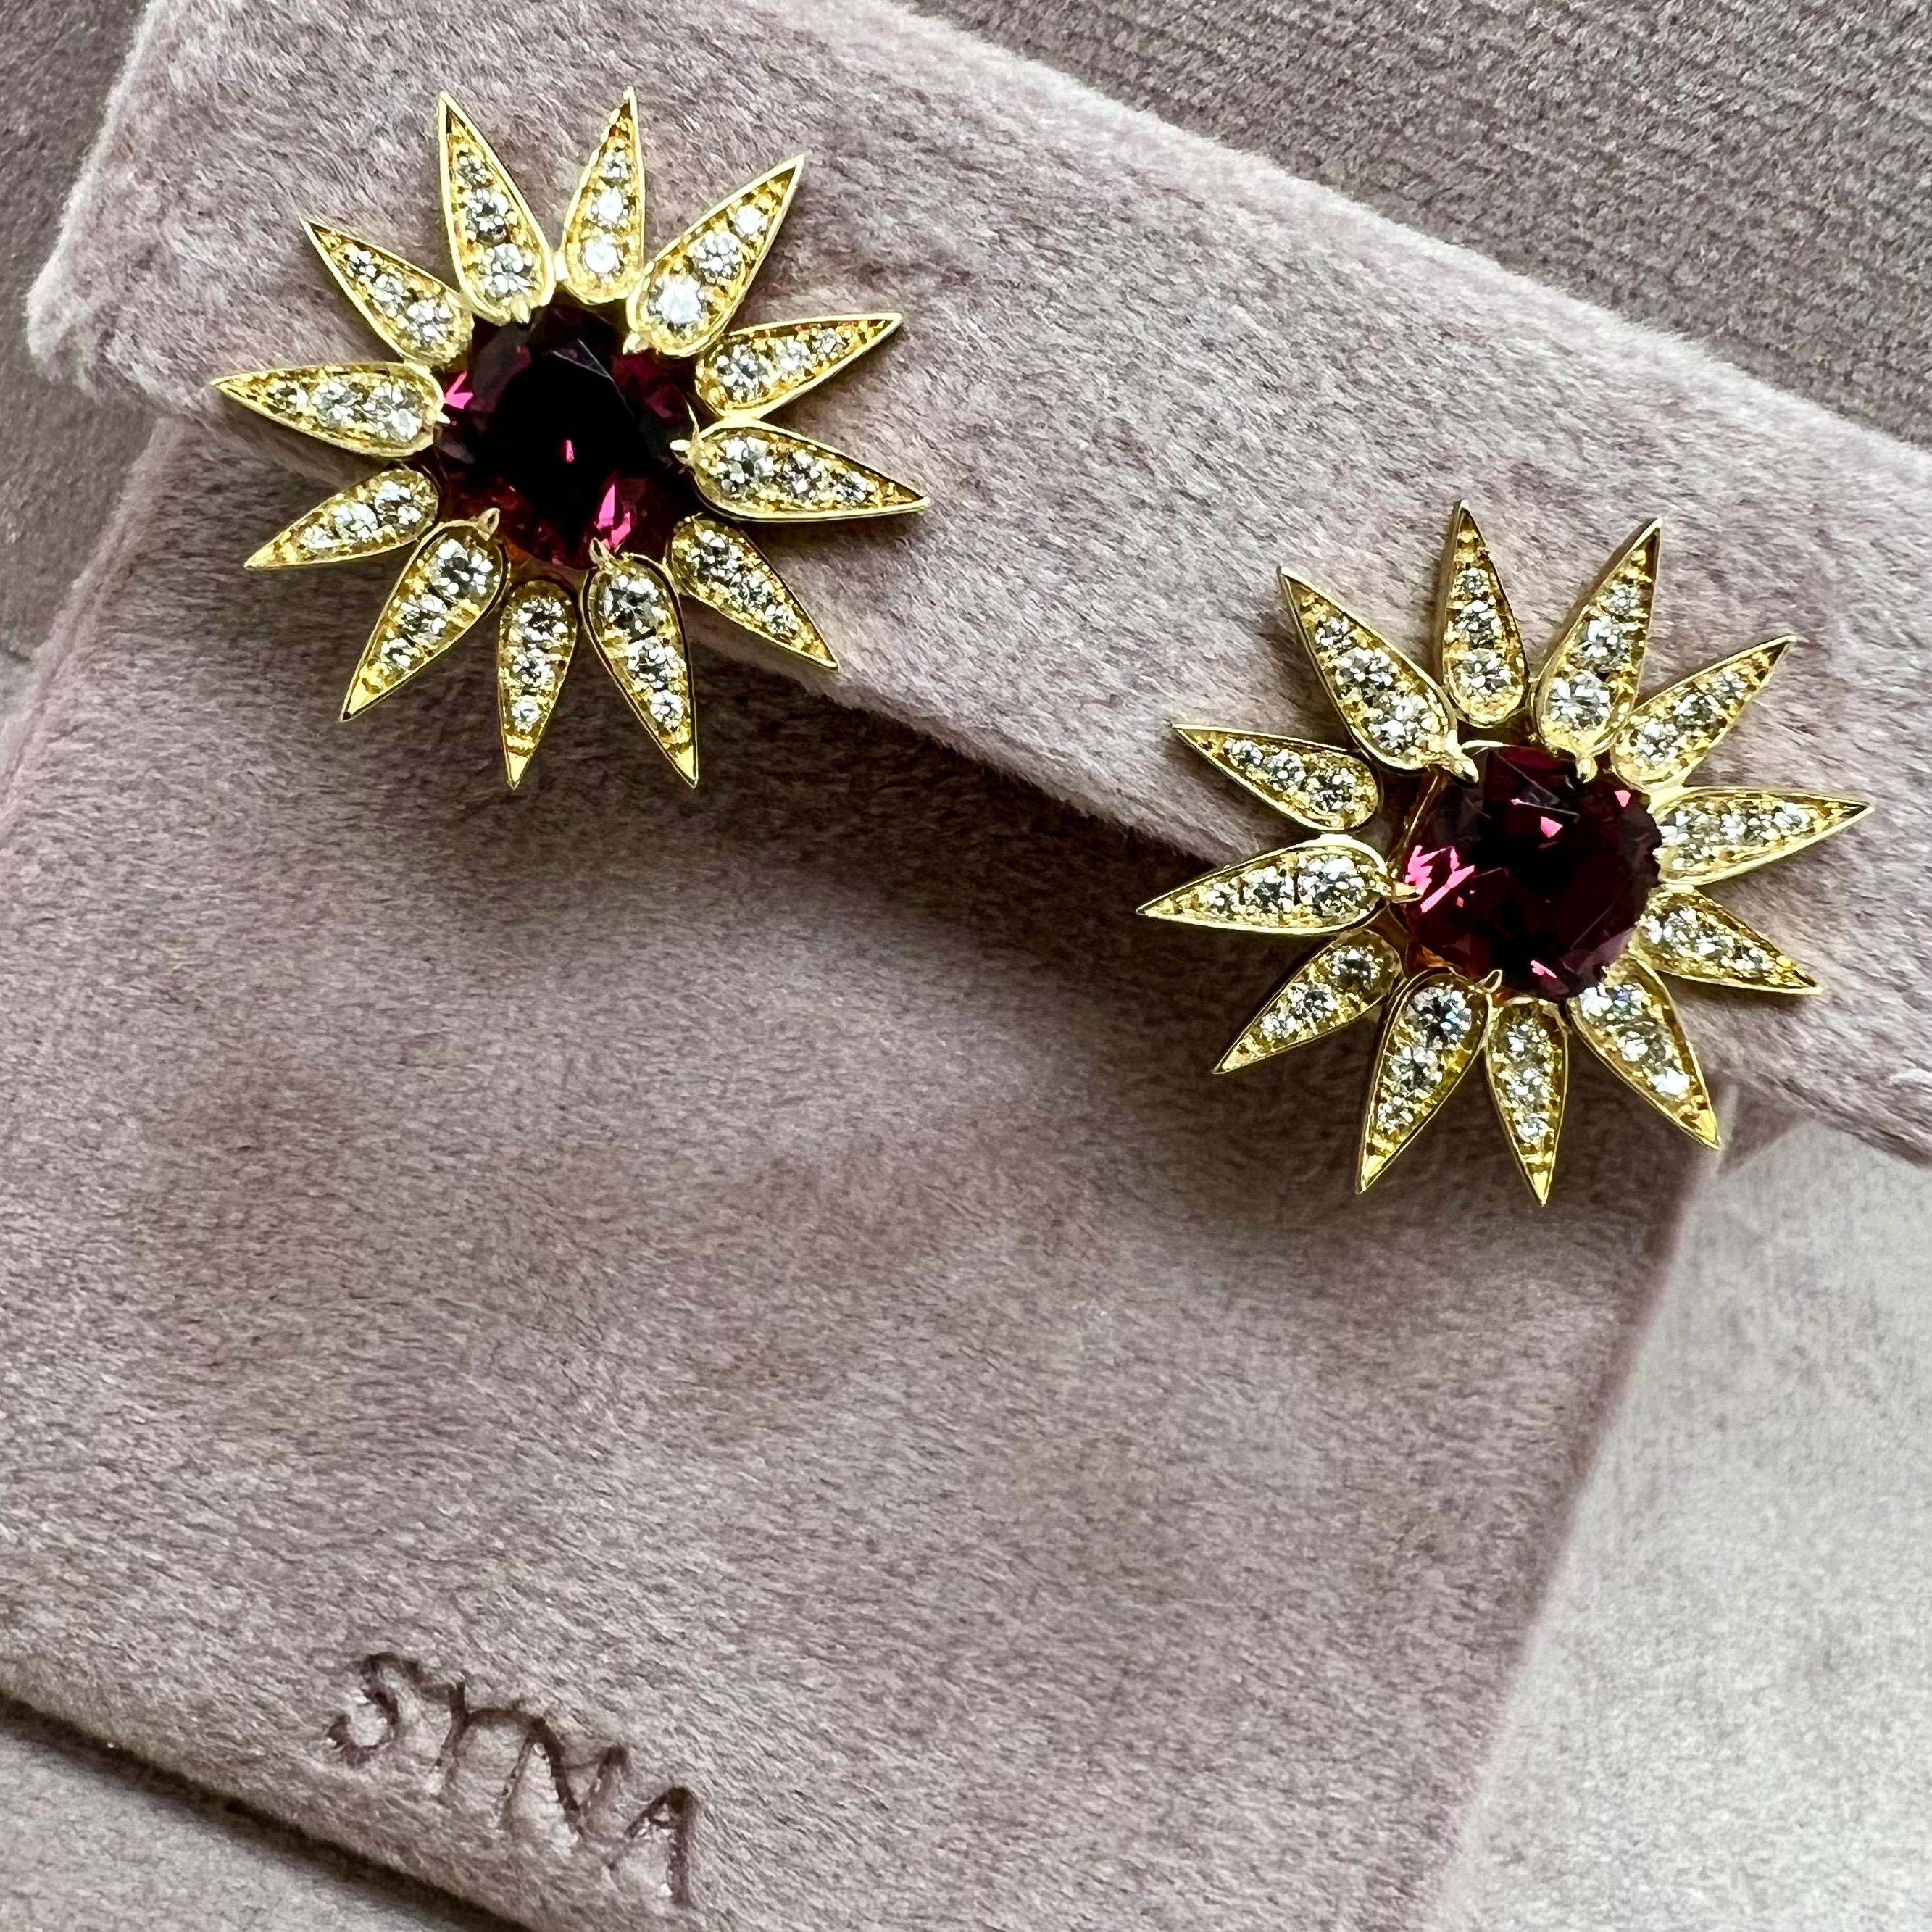 Created in 18 karat yellow gold
Rubellite 4.50 carats approx.
Diamonds 1.0 carat approx.
Omega clip-backs & posts
Limited Edition

Forged from 18 karat yellow gold, these limited edition earrings feature an approximate 4.5 carat Rubellite and 1.0